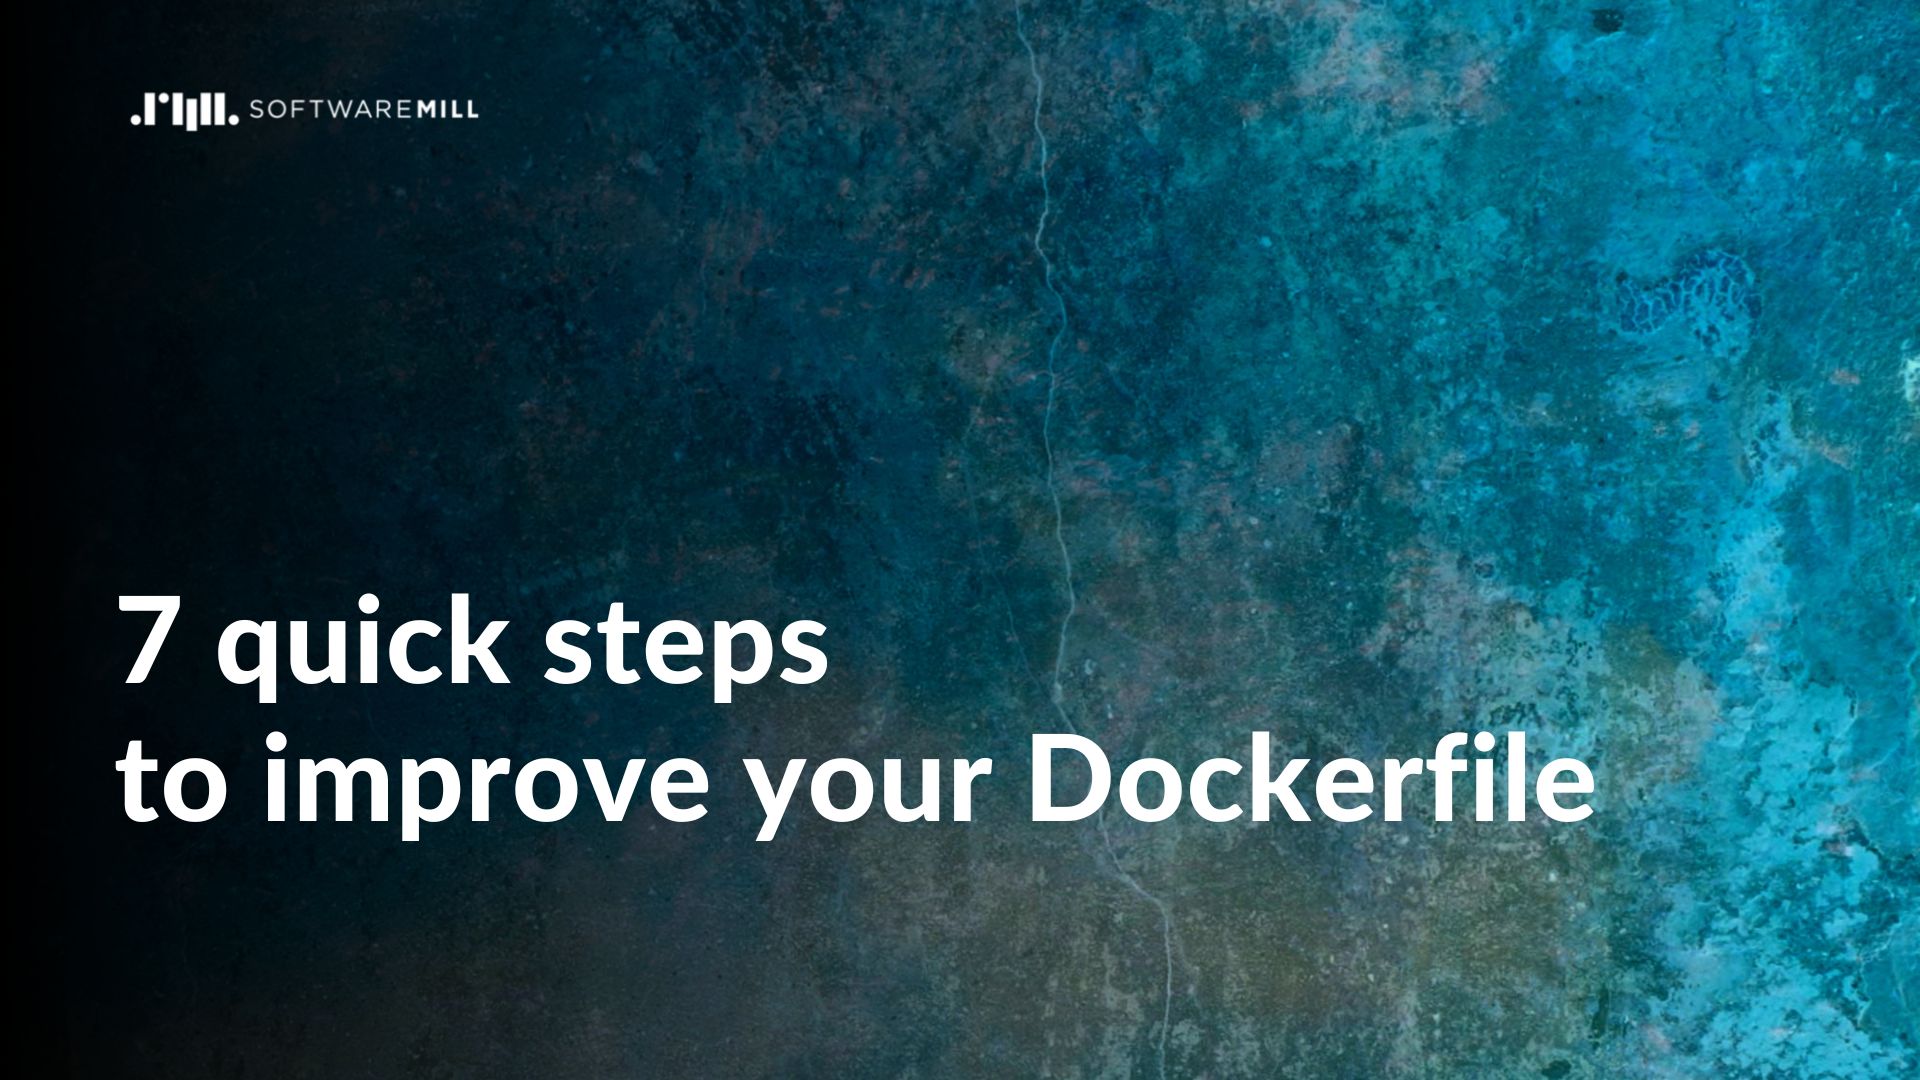 7 quick steps to improve your Dockerfile webp image